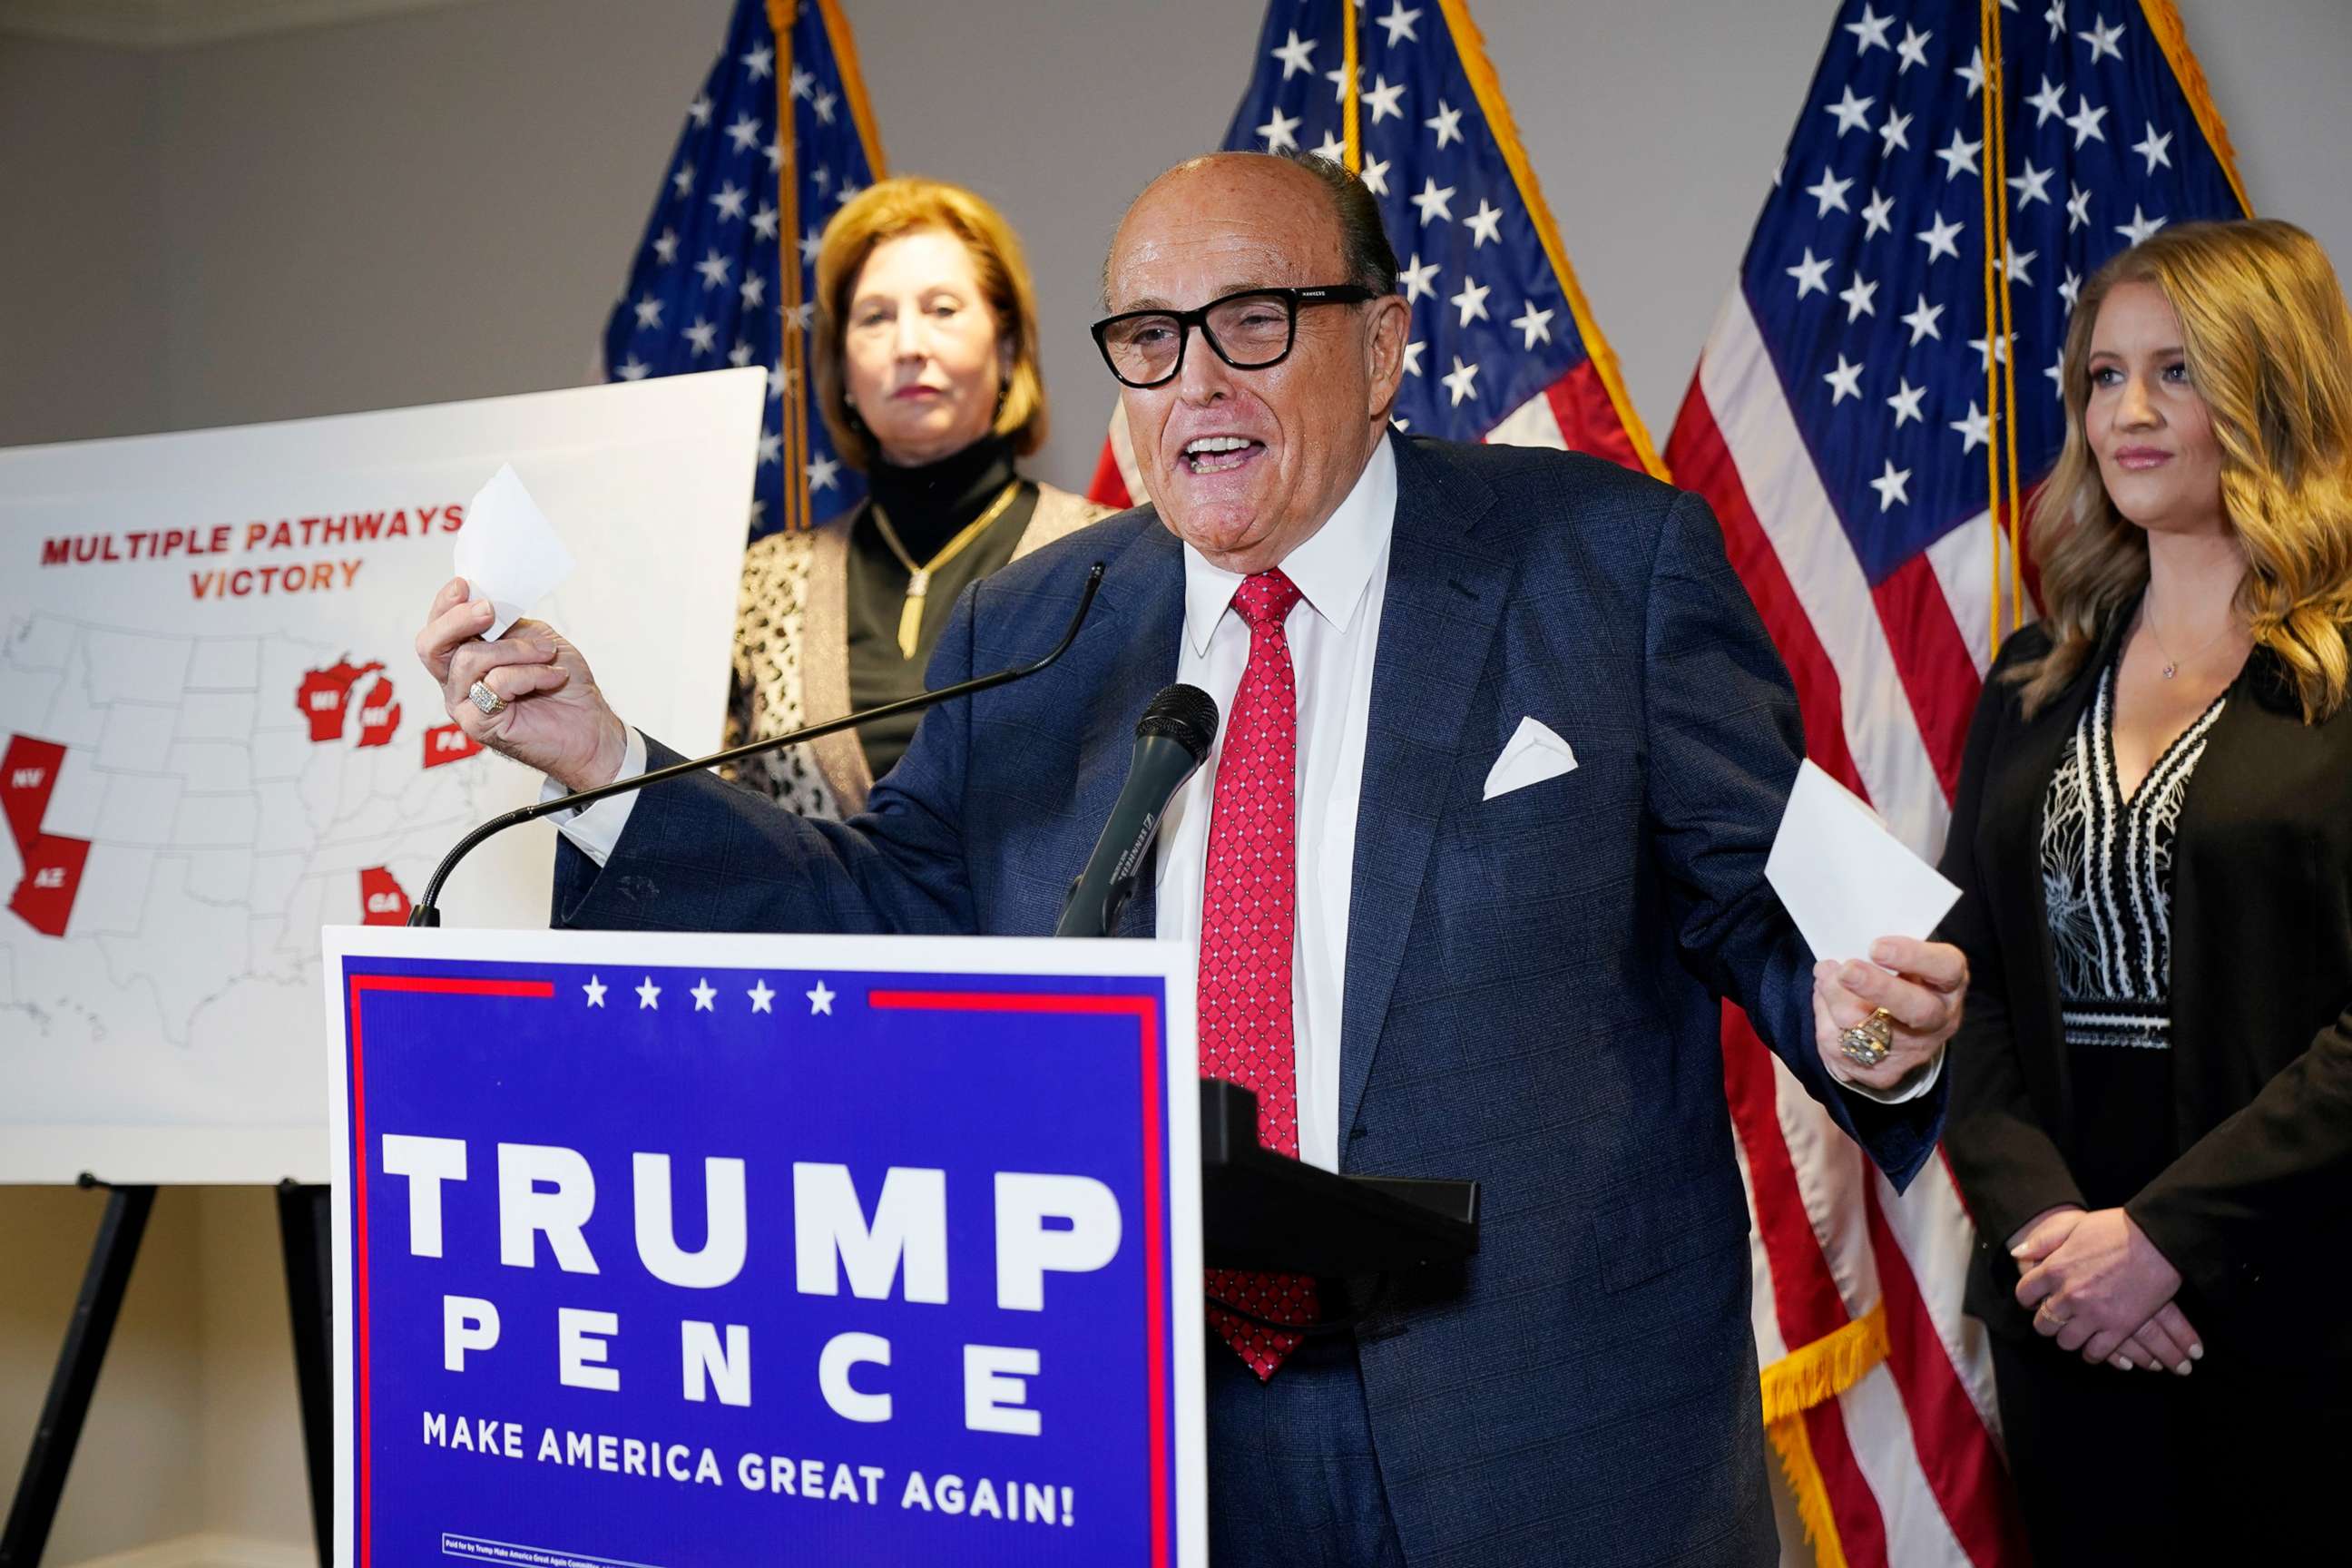 PHOTO: In this Nov. 19, 2020, file photo, former Mayor of New York Rudy Giuliani, a lawyer for President Donald Trump, speaks during a news conference at the Republican National Committee headquarters in Washington, D.C.